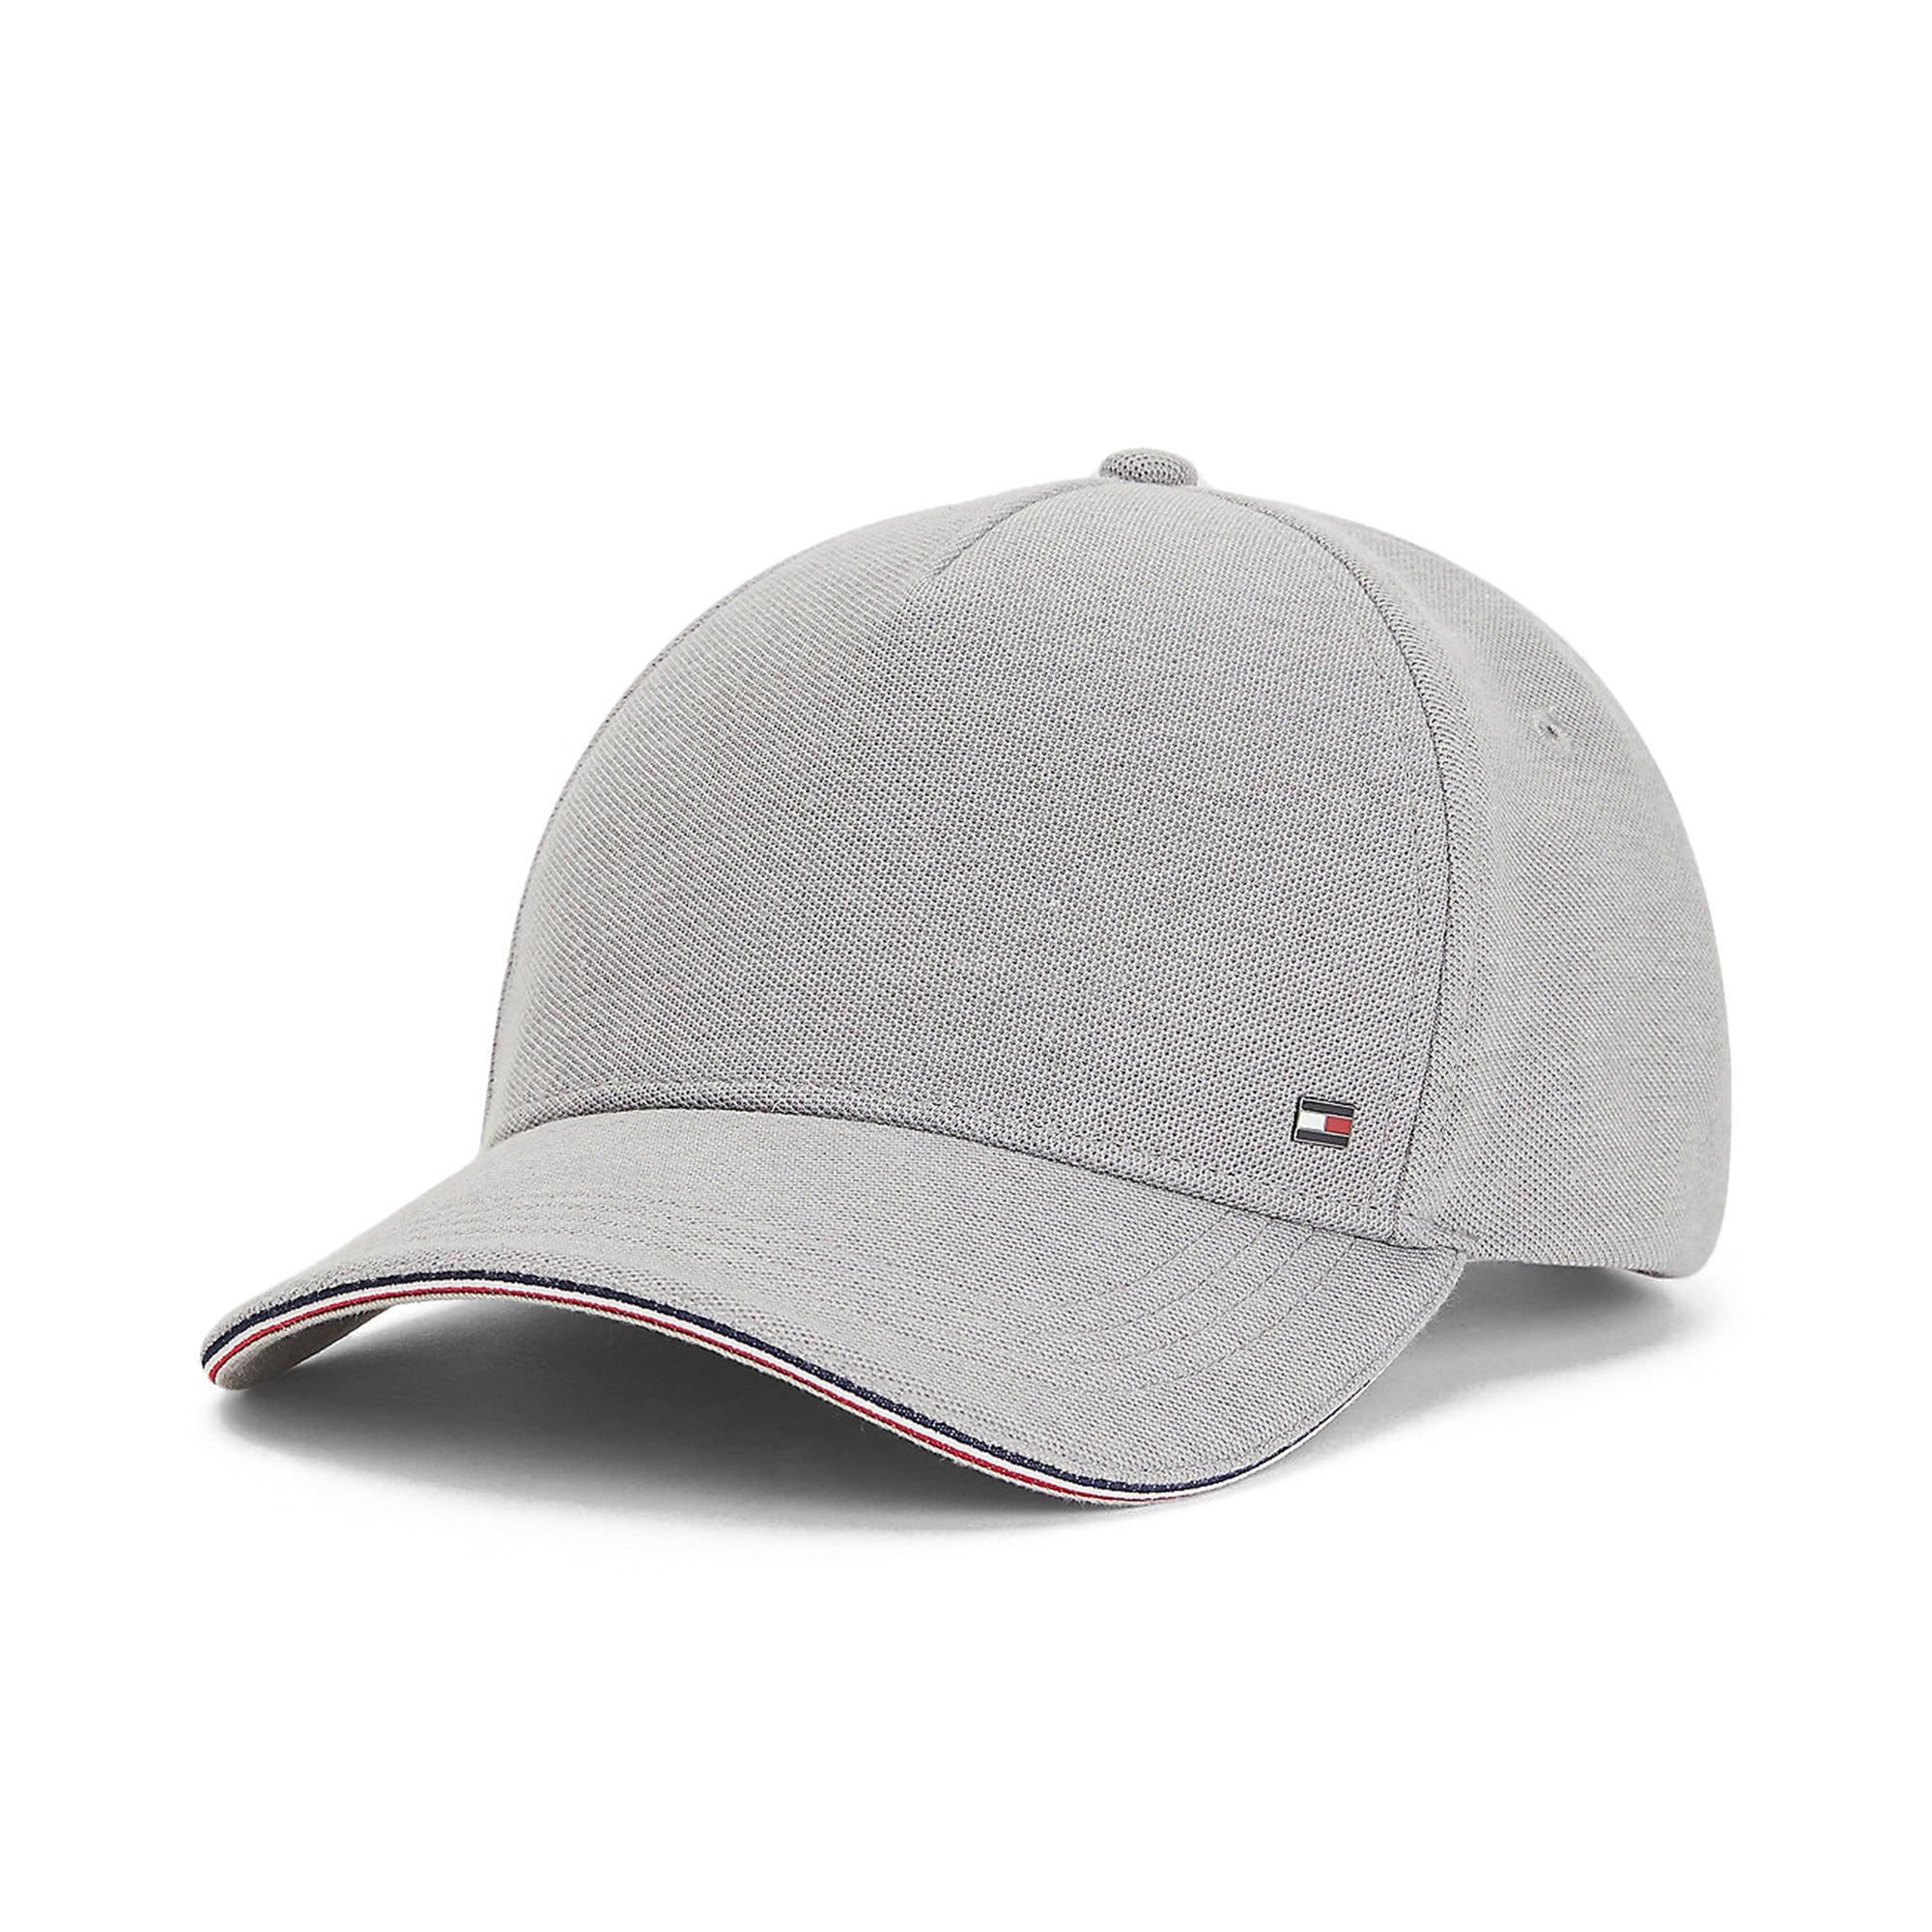 Tommy Hilfiger Elevated Corporate Cap - Mid Grey Heather